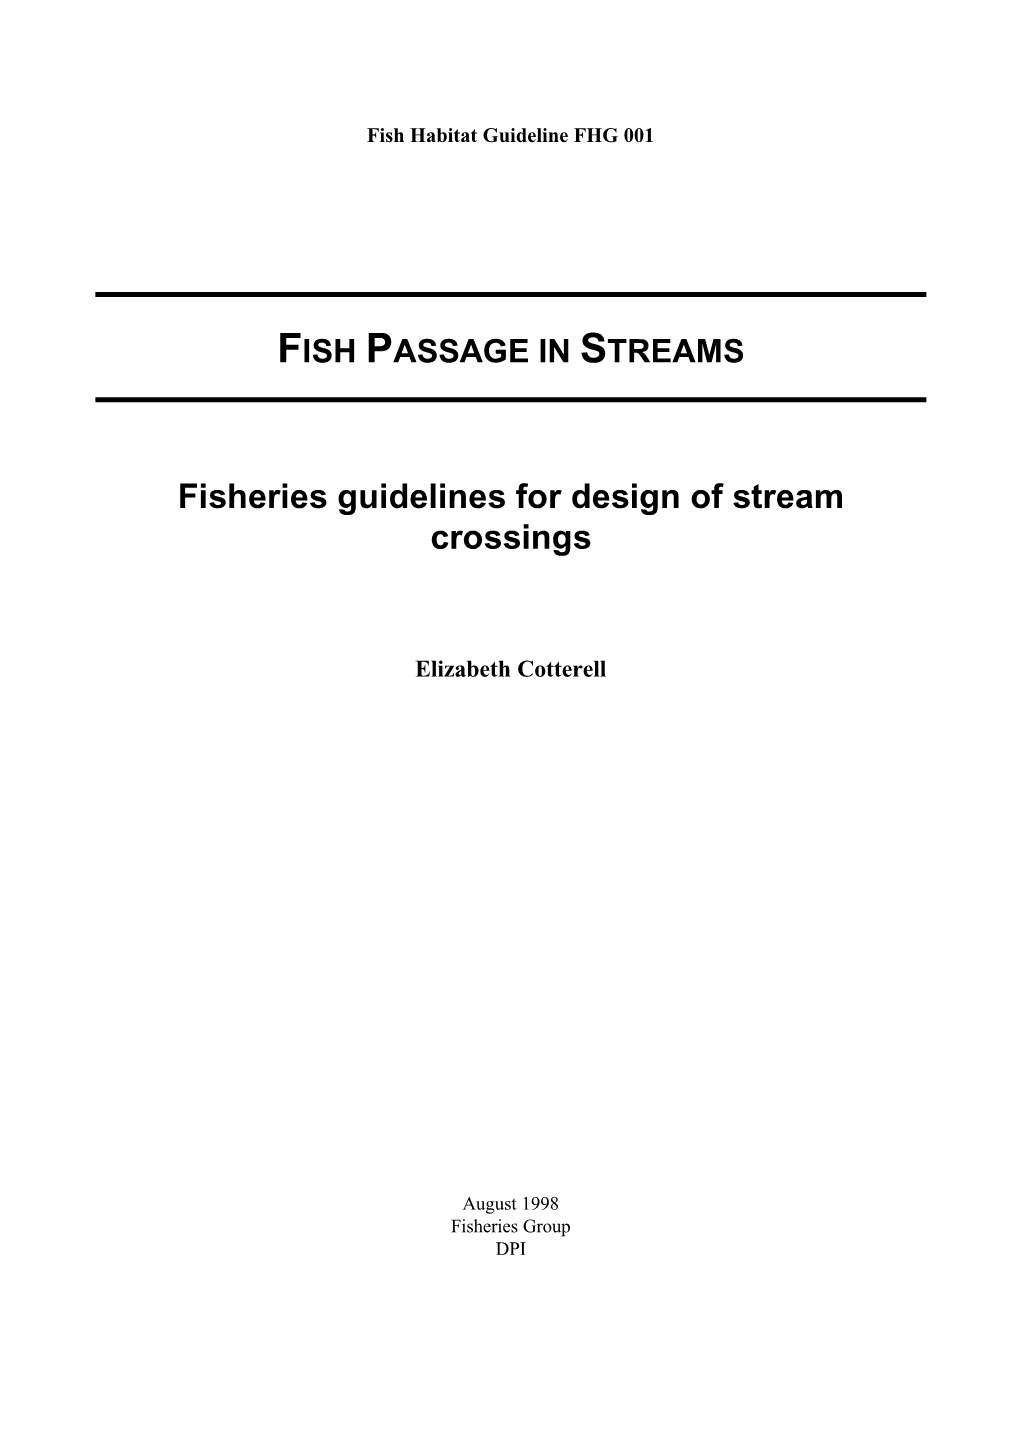 Fisheries Guidelines for Design of Stream Crossings